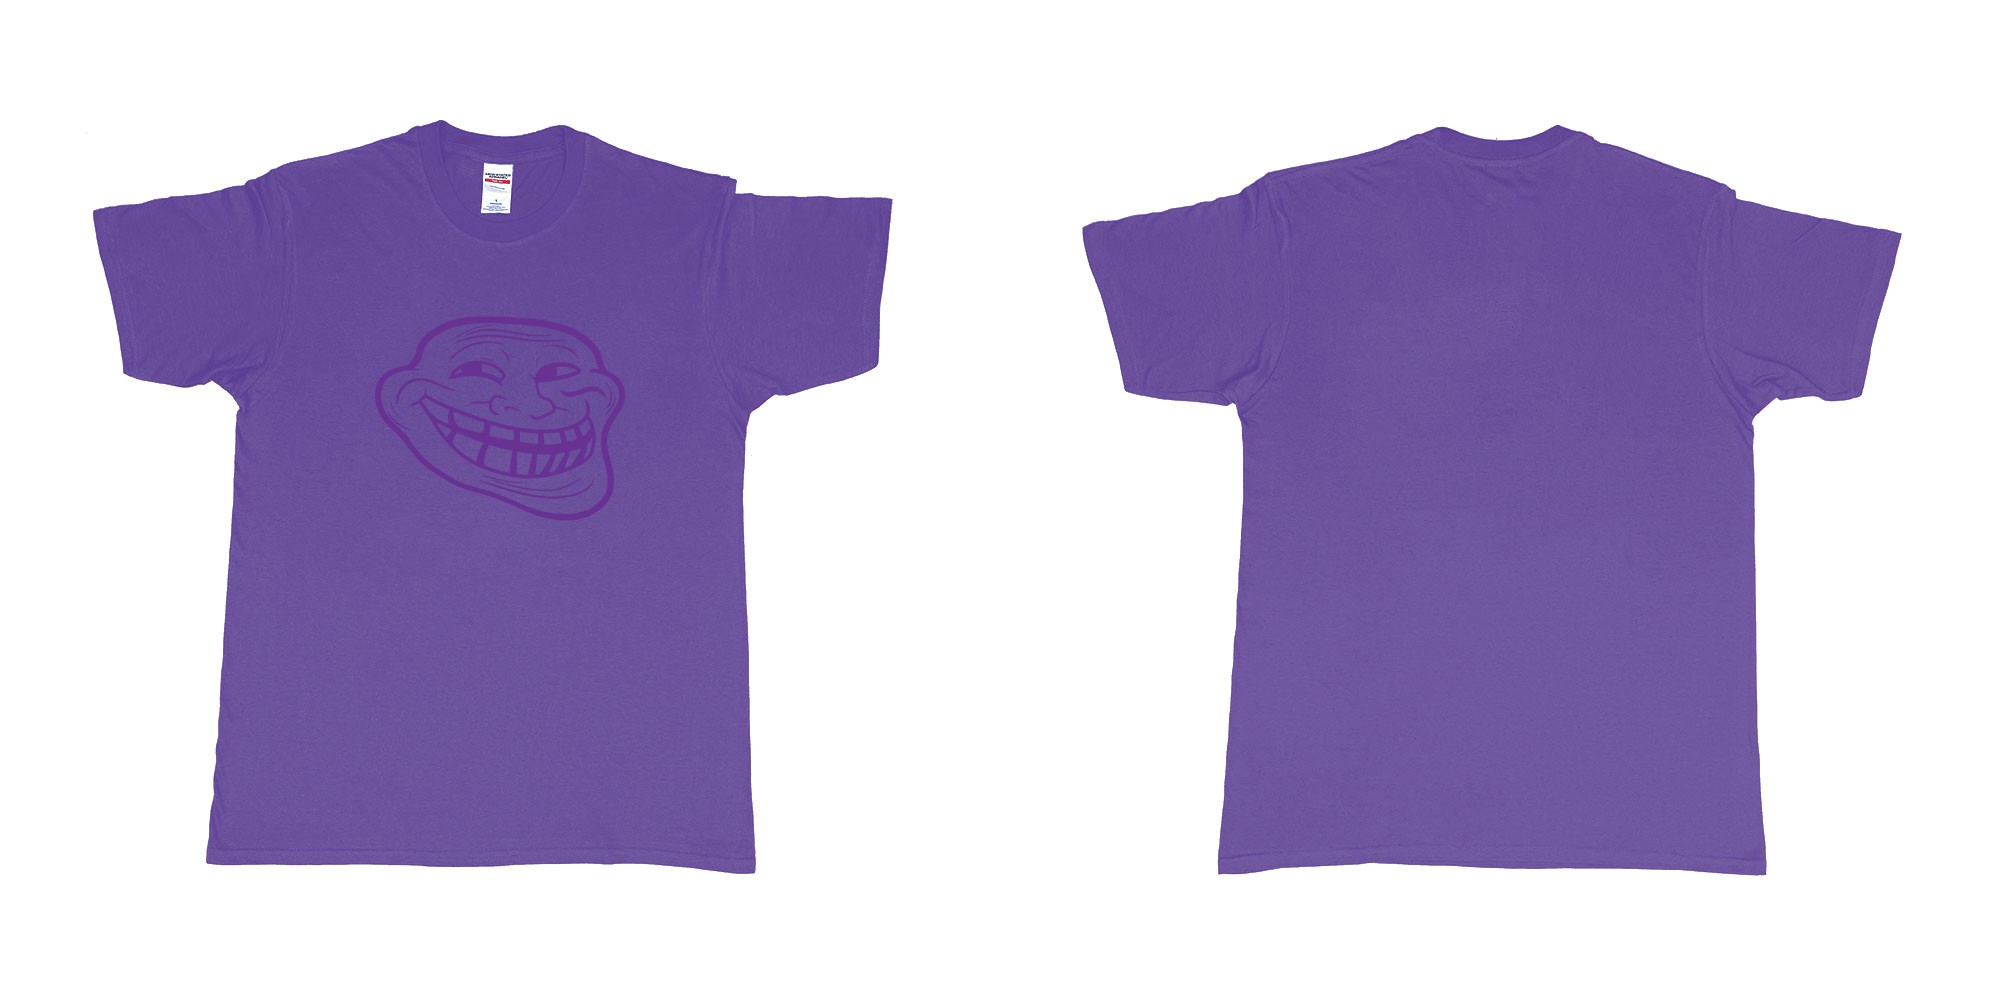 Custom tshirt design Trolling in fabric color purple choice your own text made in Bali by The Pirate Way